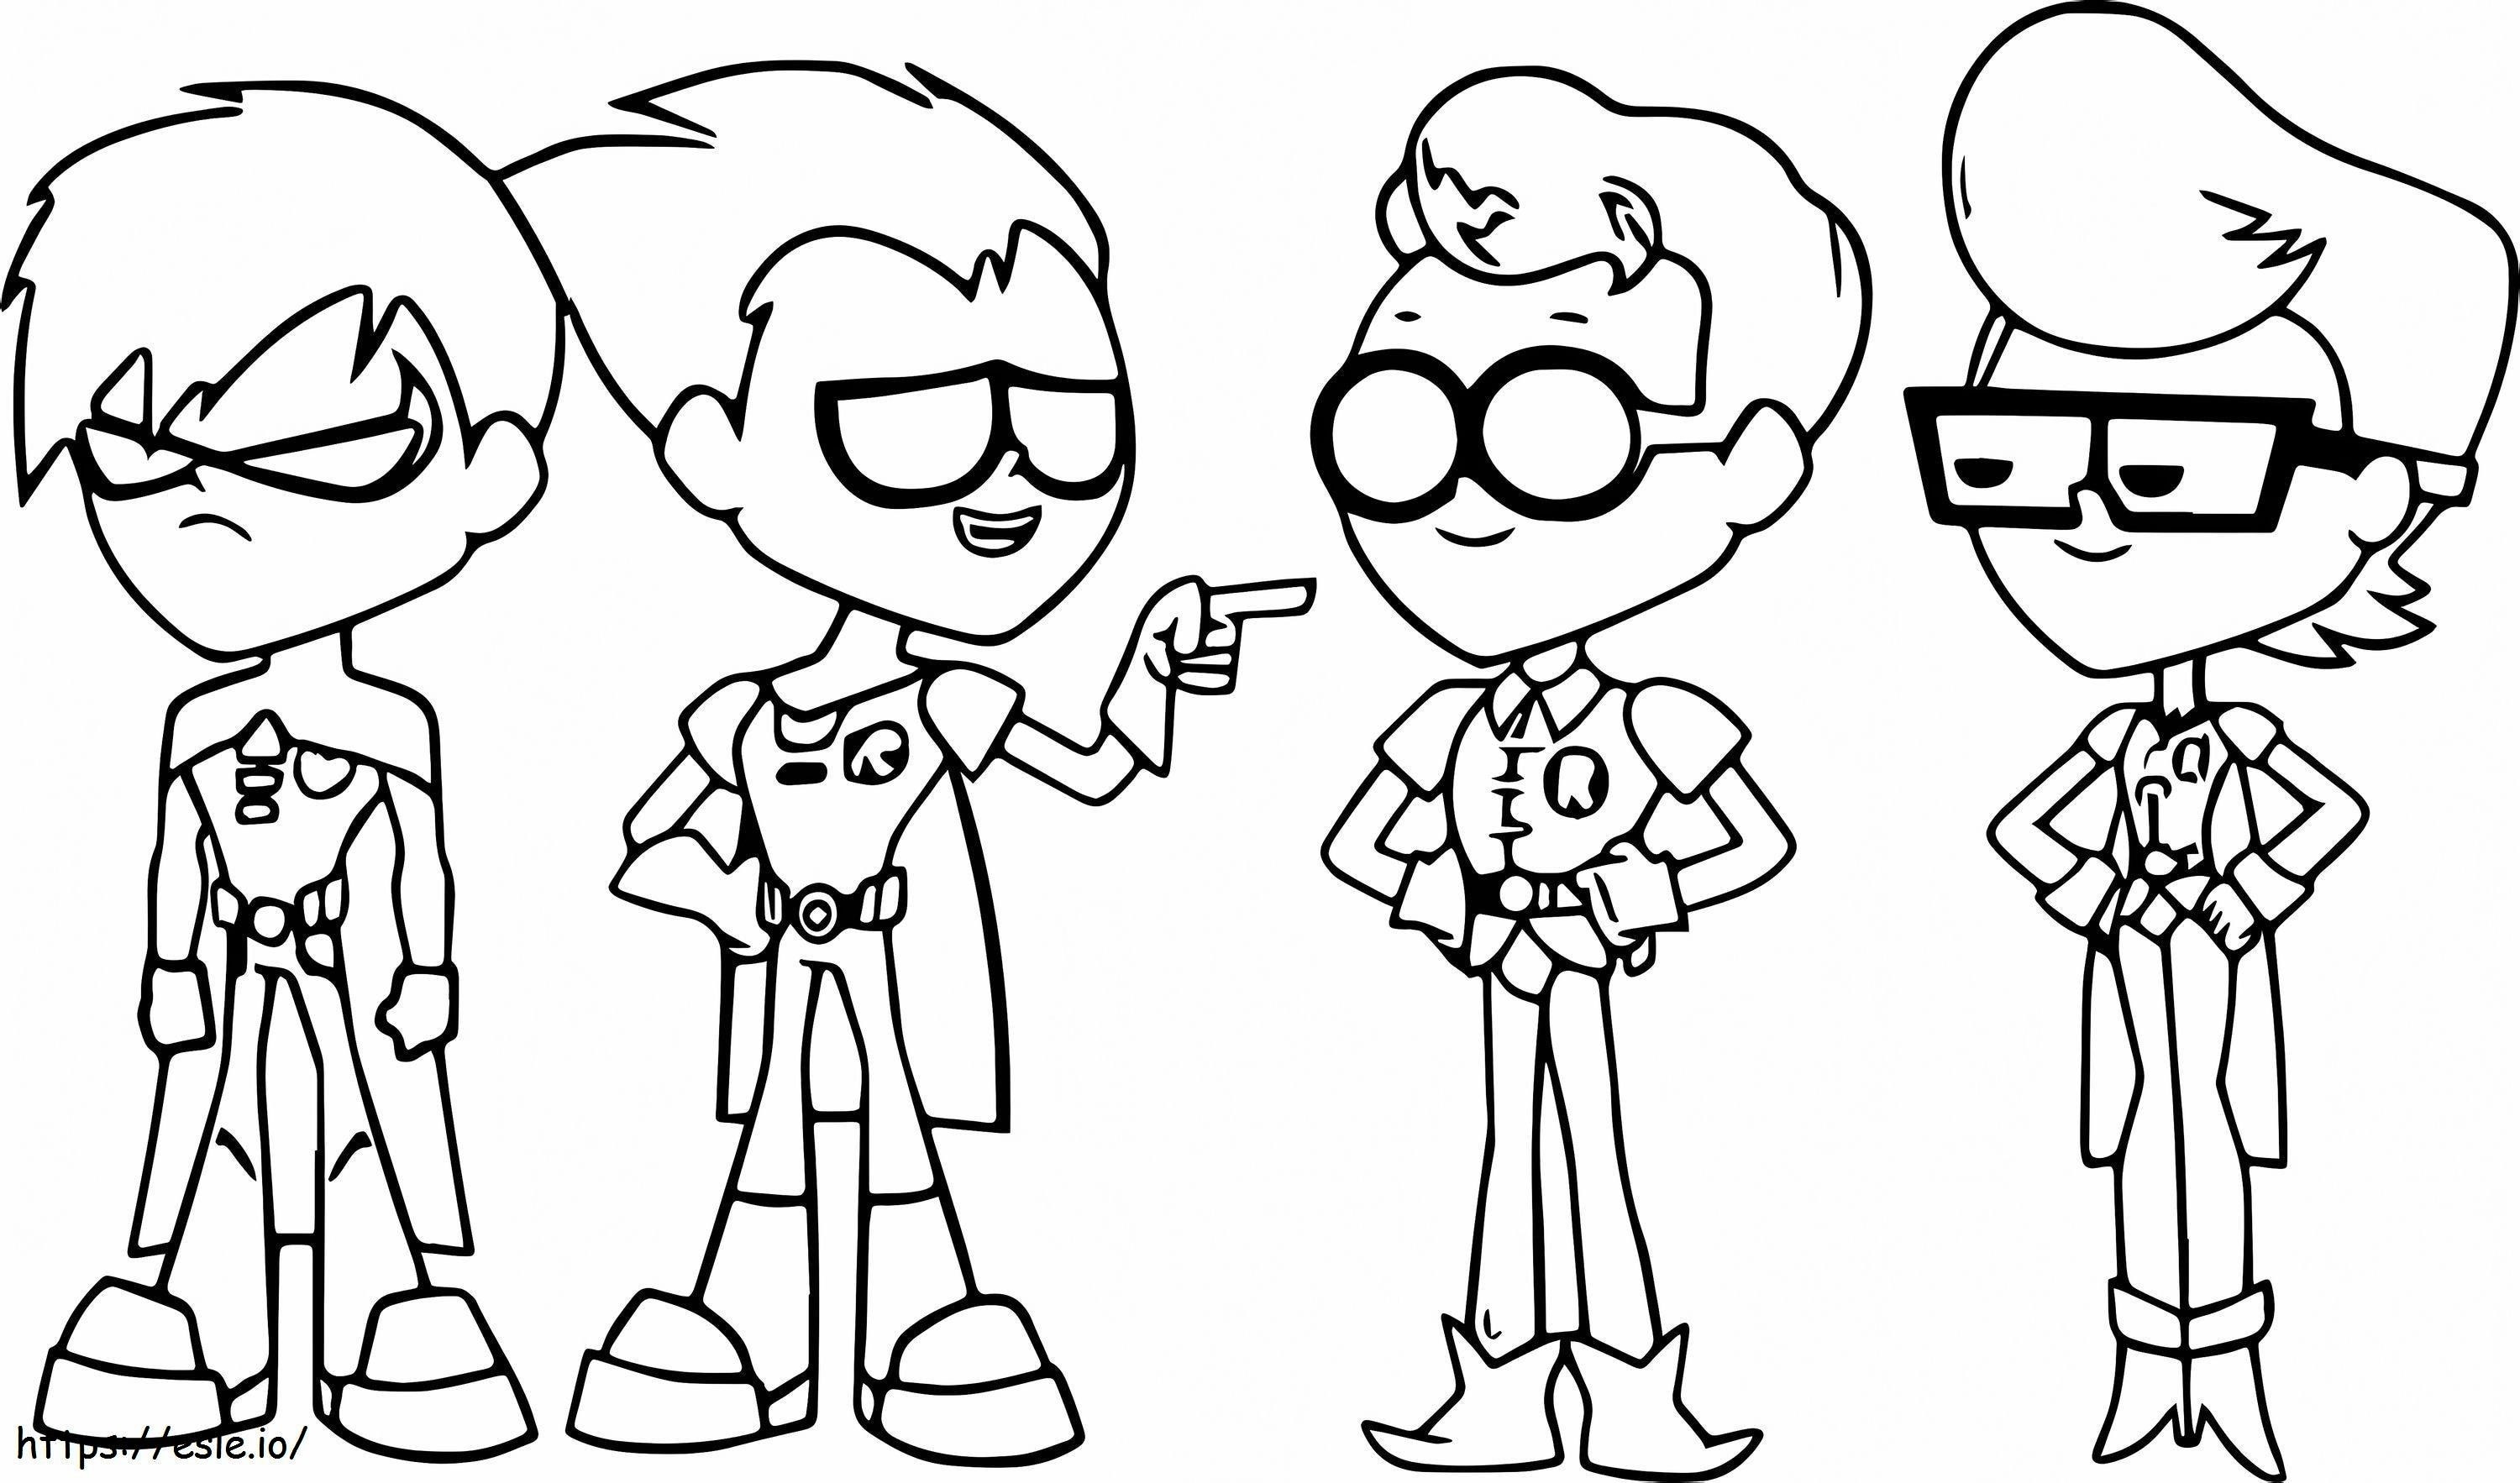 1550476050 1525273697Teen Titans Go Robin coloring page